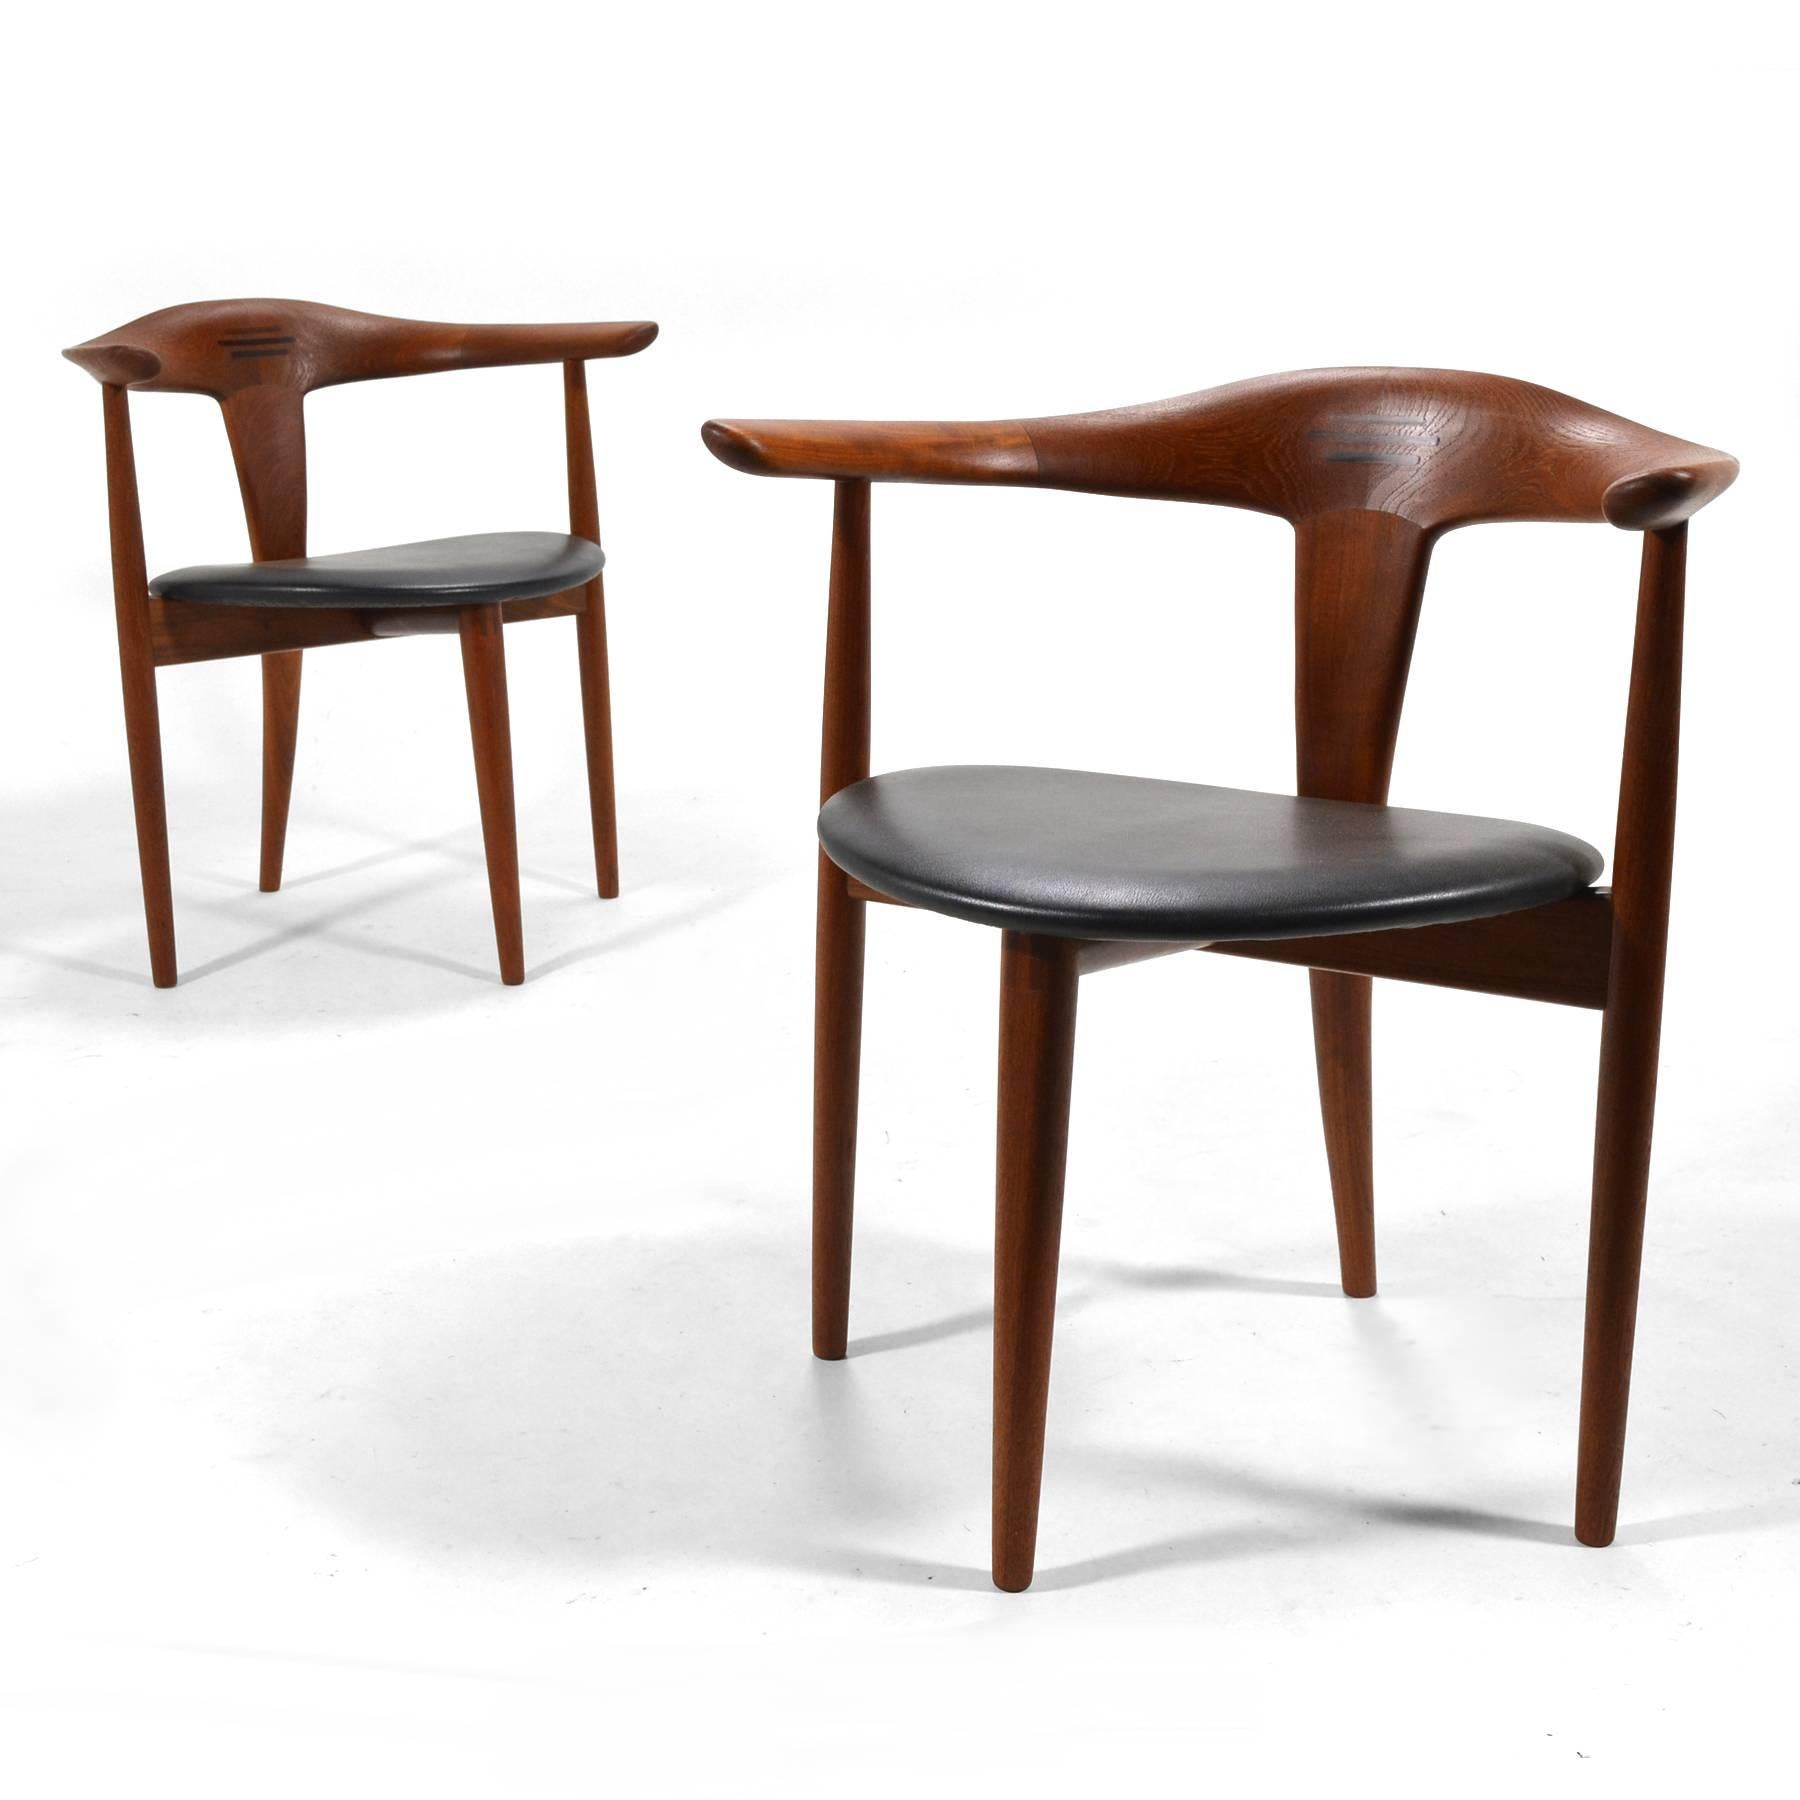 This exquisite pair of teak easy chairs were designed by Erik Andersen and Palle Pedersen and fabricated by cabinetmaker Randers Møbelfabrik.